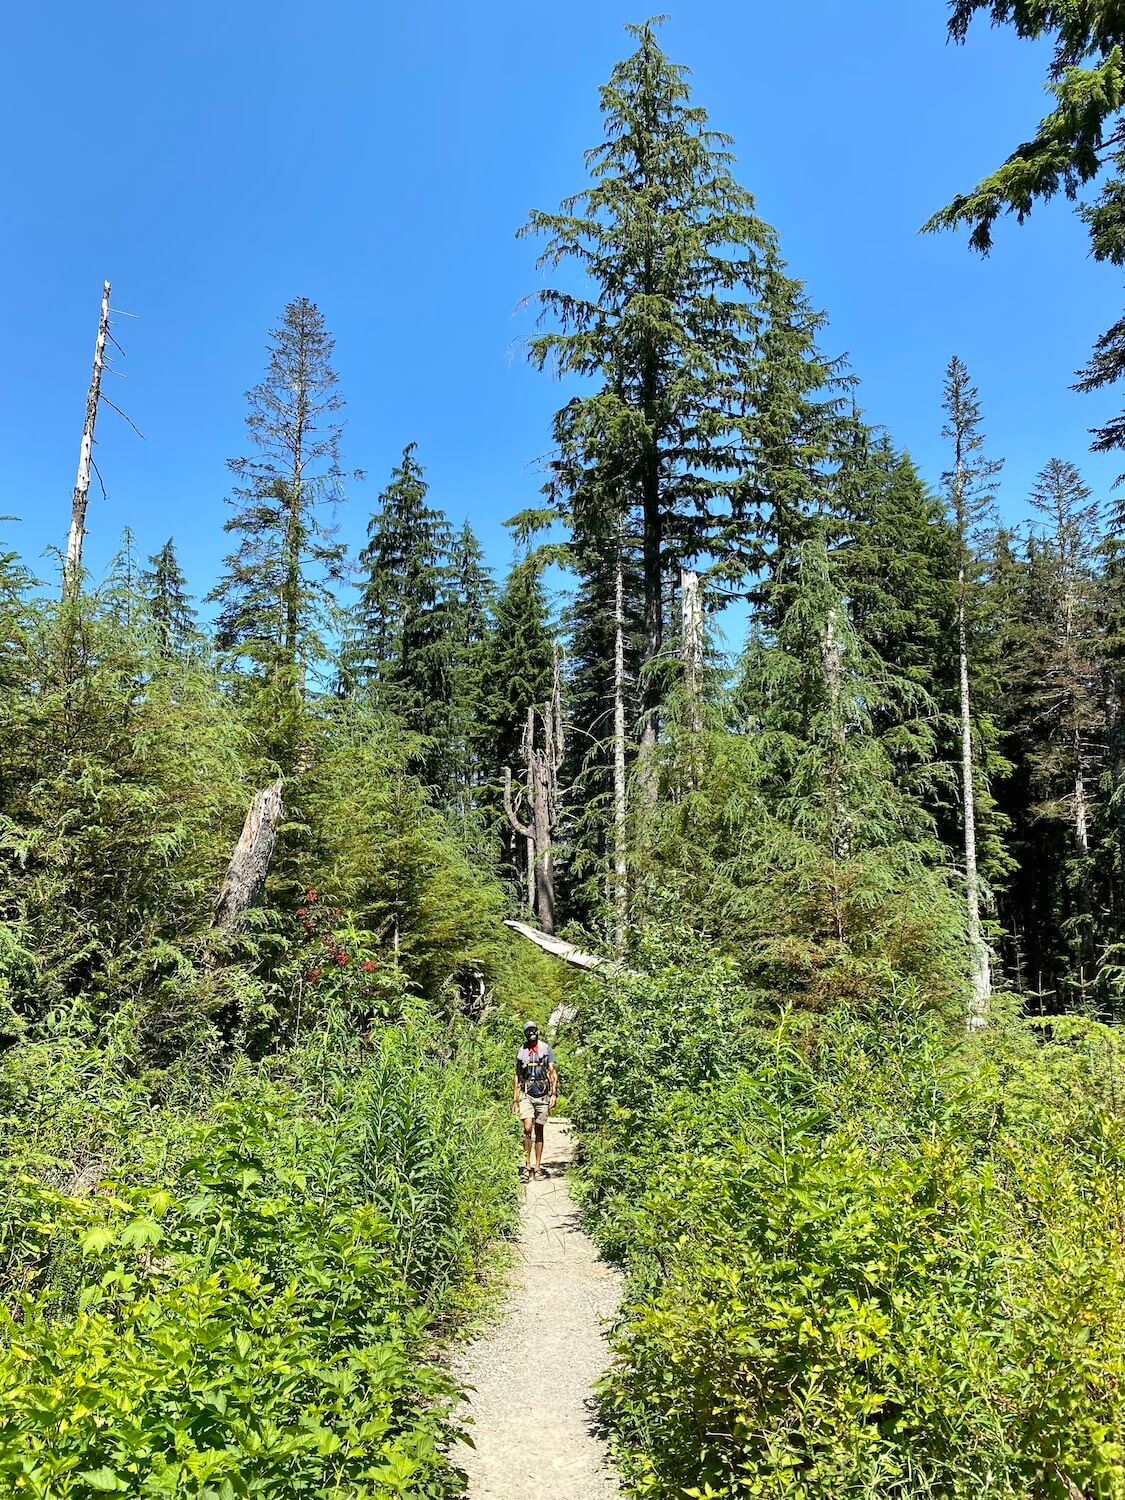 The hiking trail to Big Four Ice Caves begins to open up to large green shrubs with a few trees in the background under blue sky.